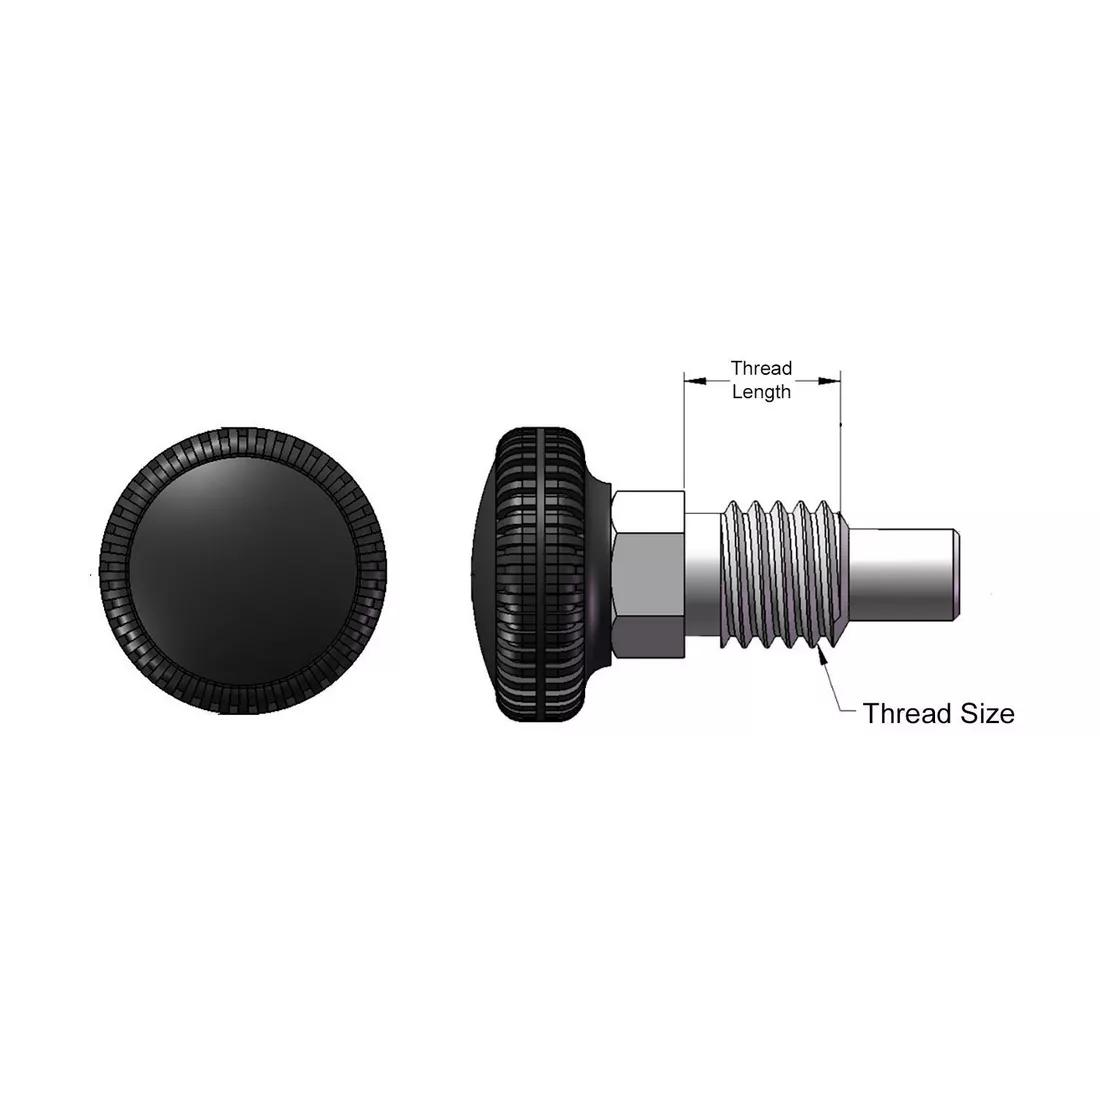 K4 Knurled Knob Plunger Pin - Line Drawing